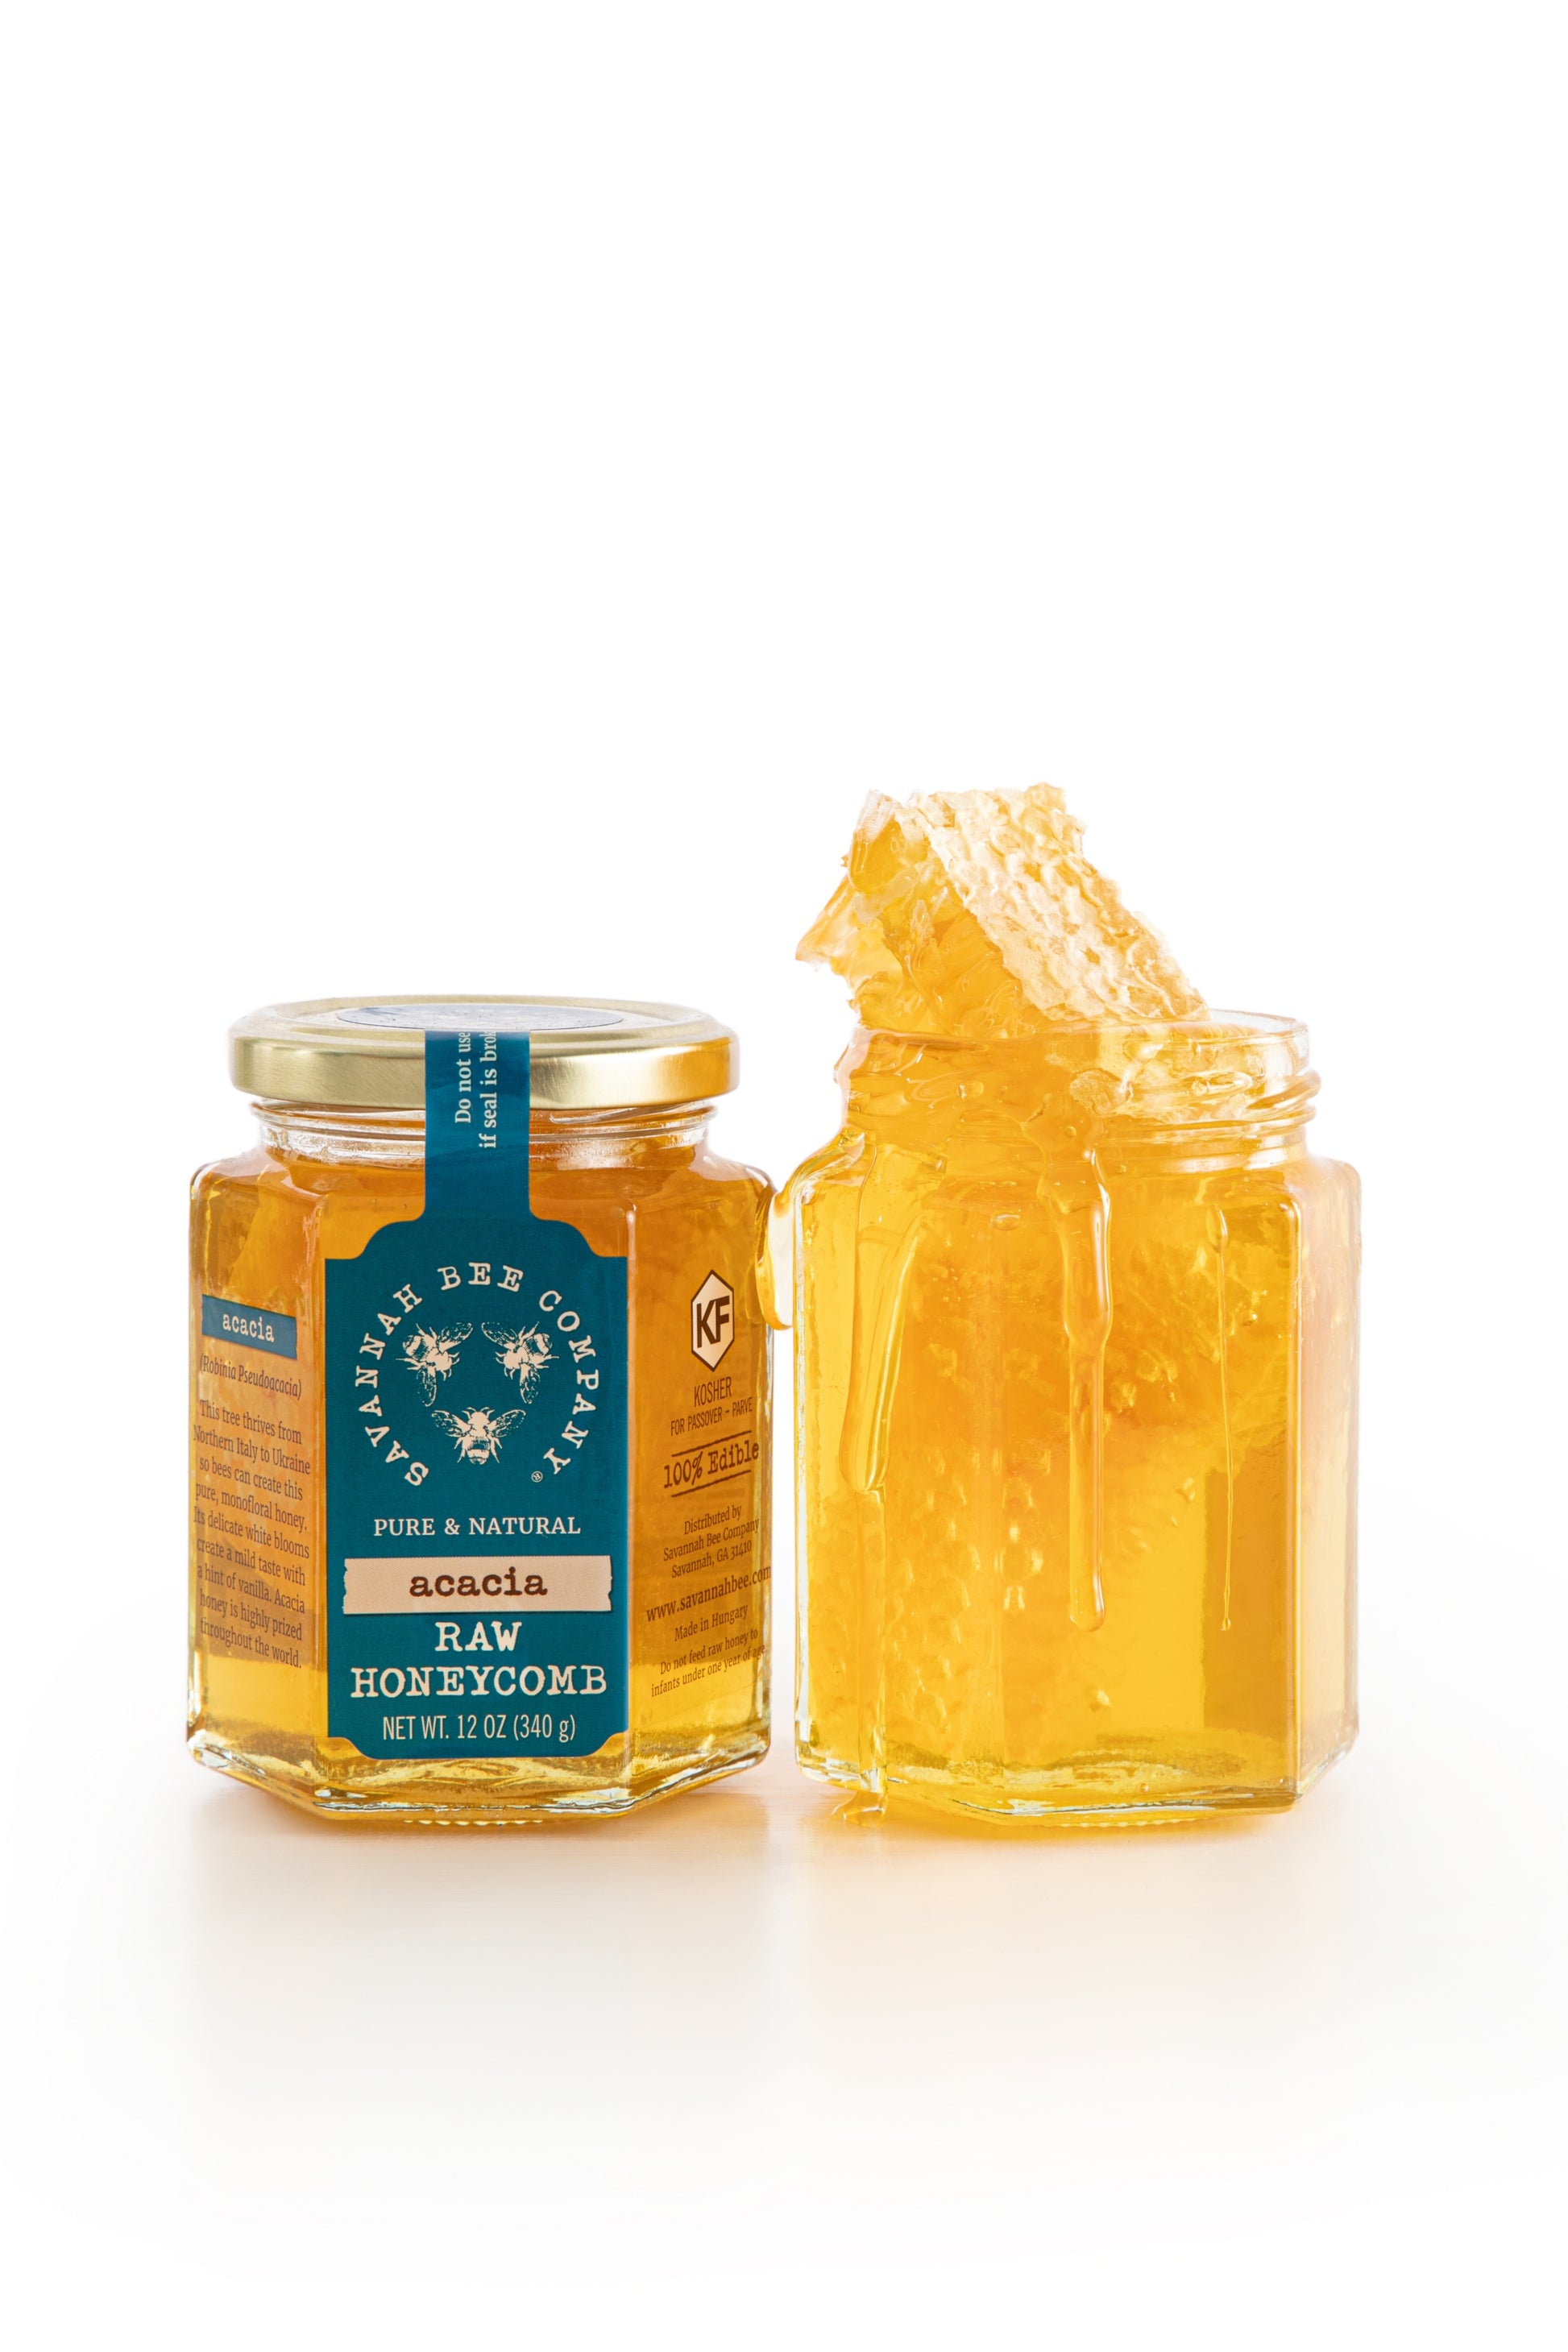 Pure & Natural Acacia Raw Honeycomb in a 12 oz jar with a golden lid.